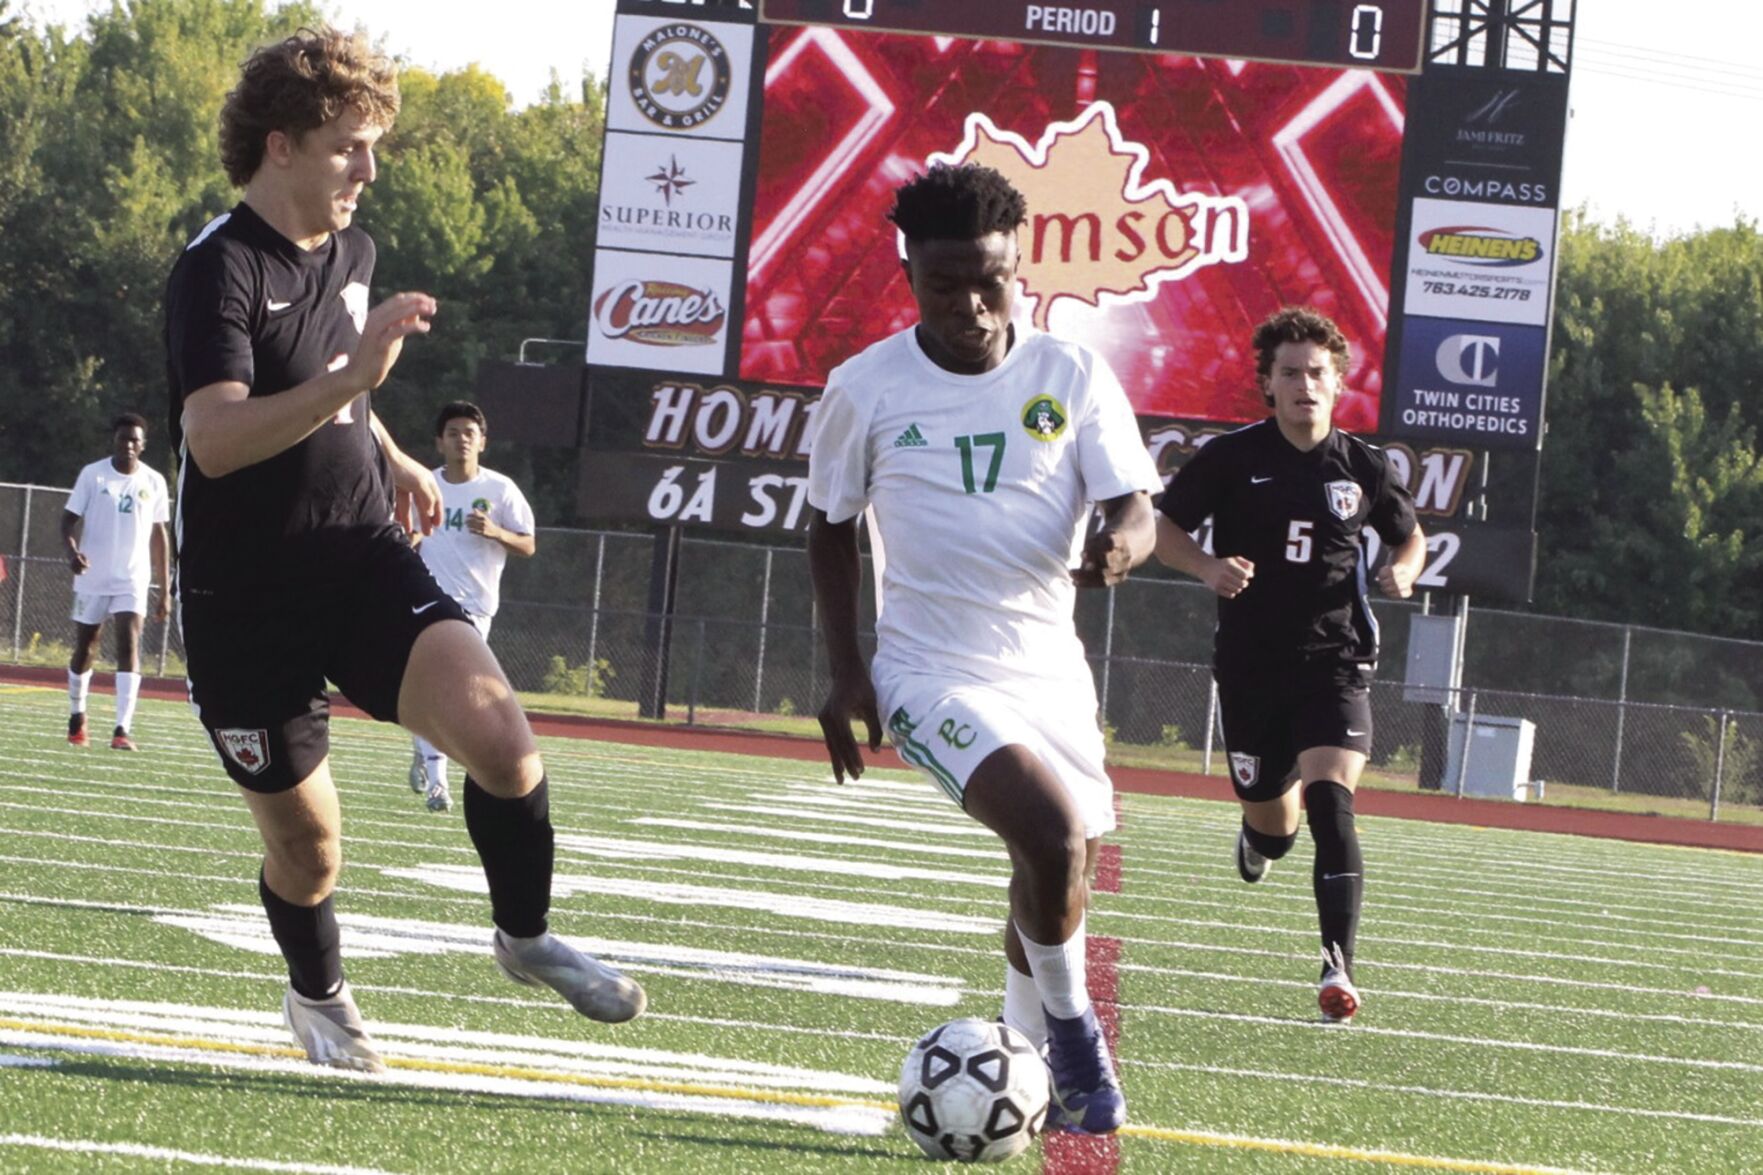 Park Center boys soccer goes 1-1-1 amid difficult week of games